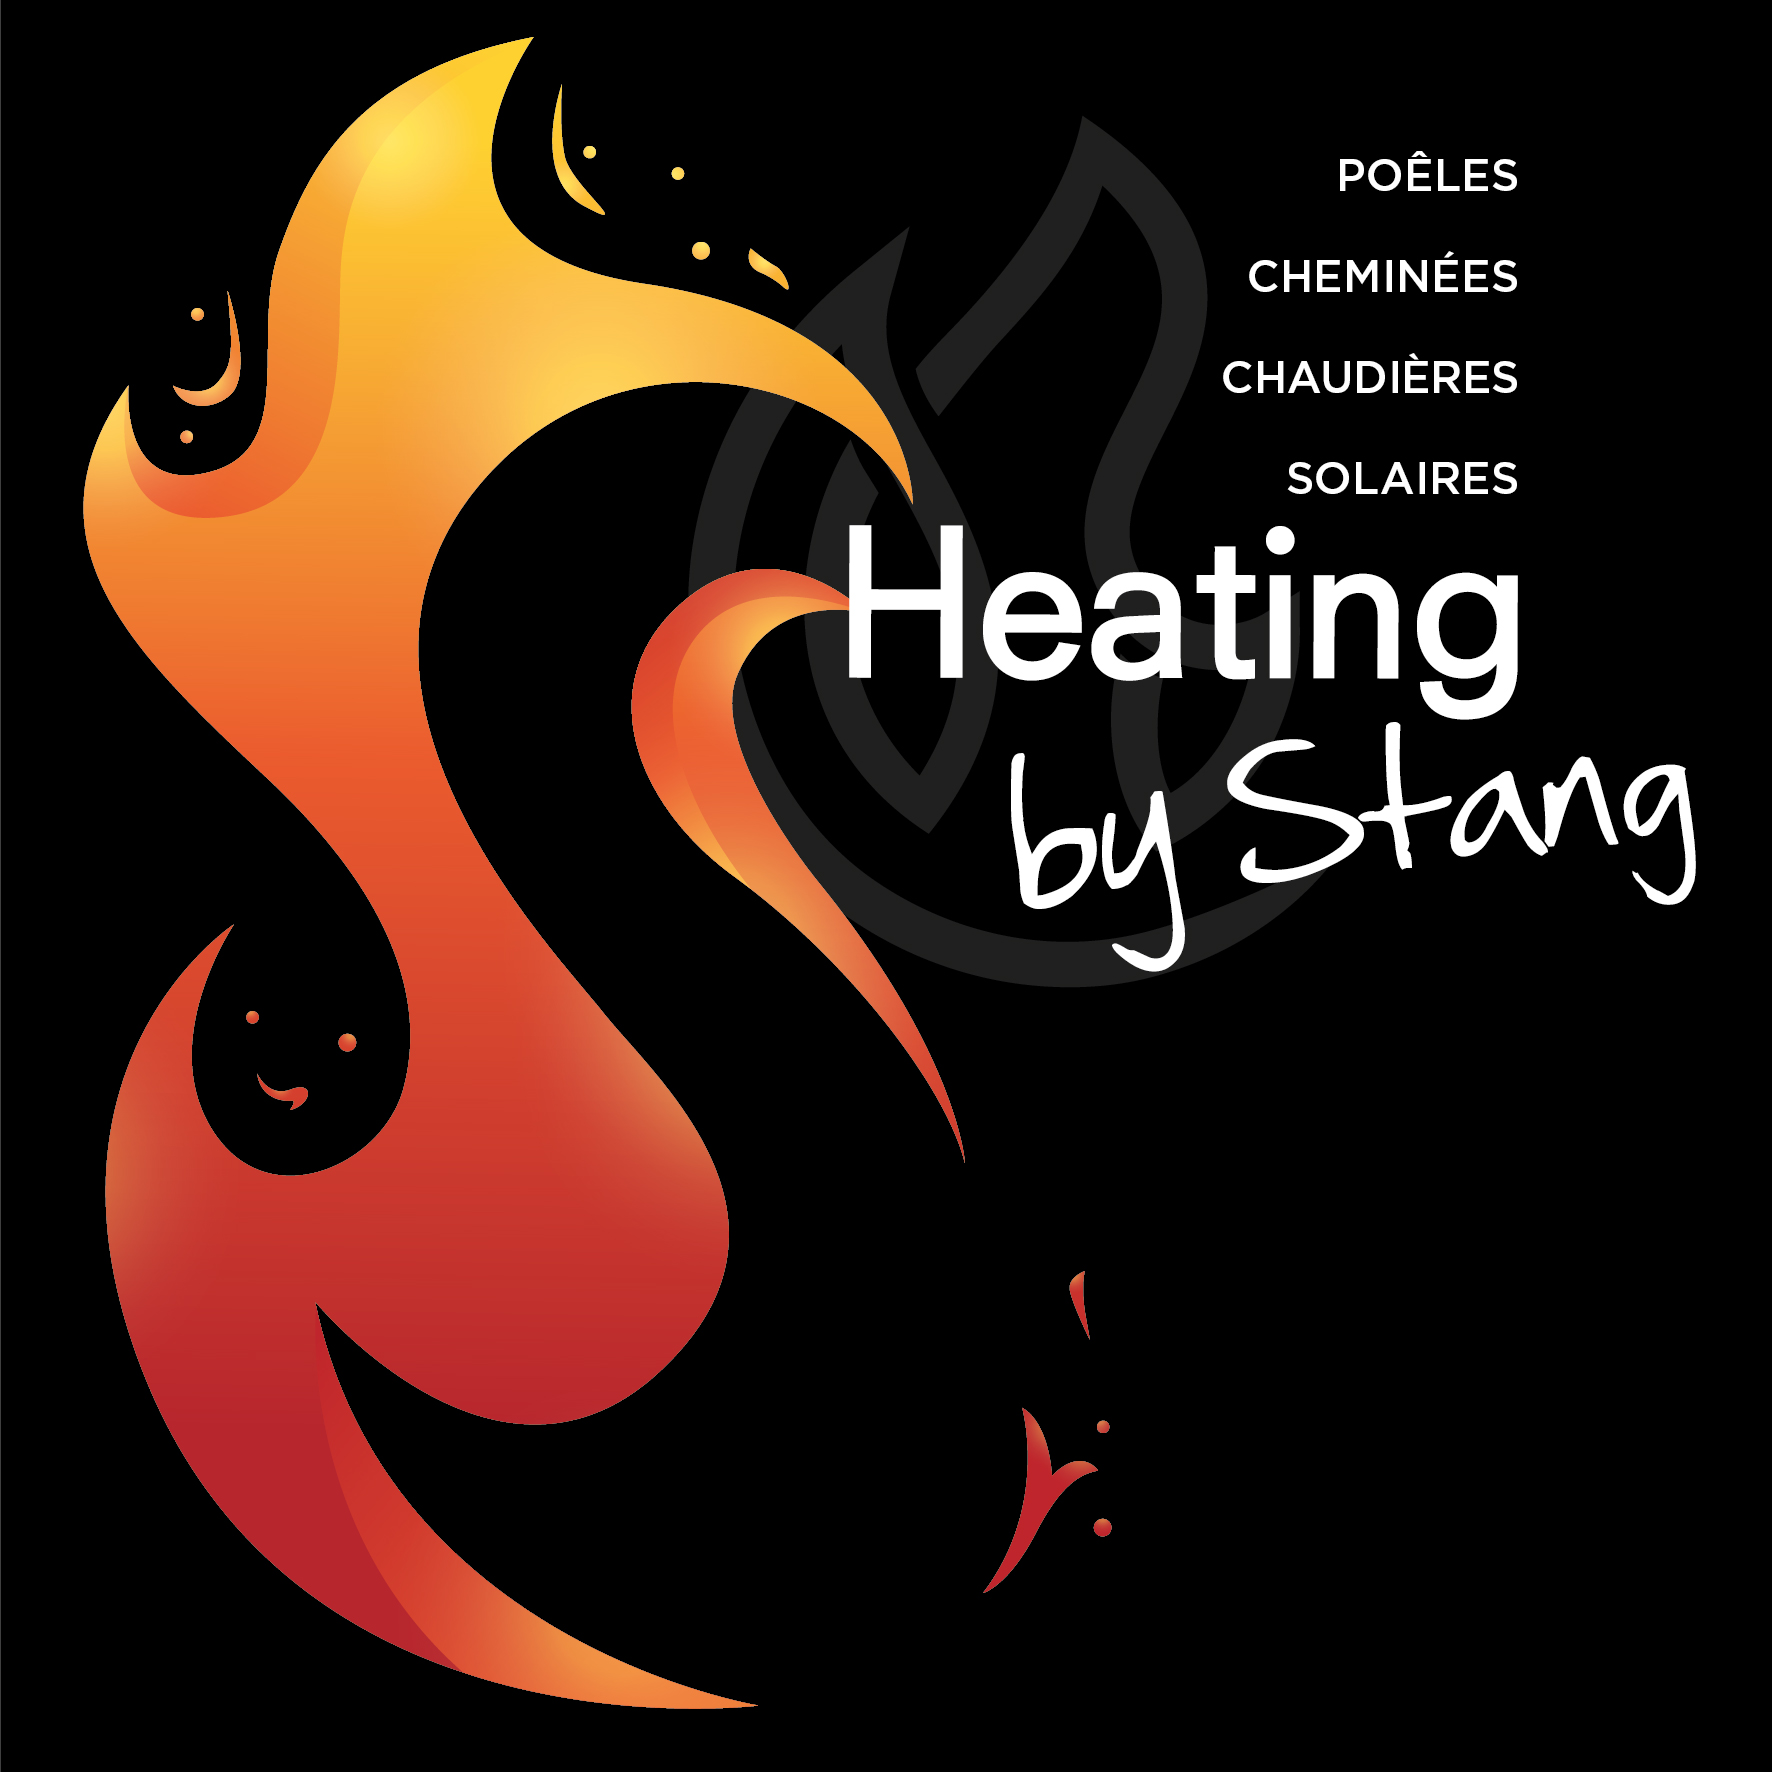 HEATING BY STANG